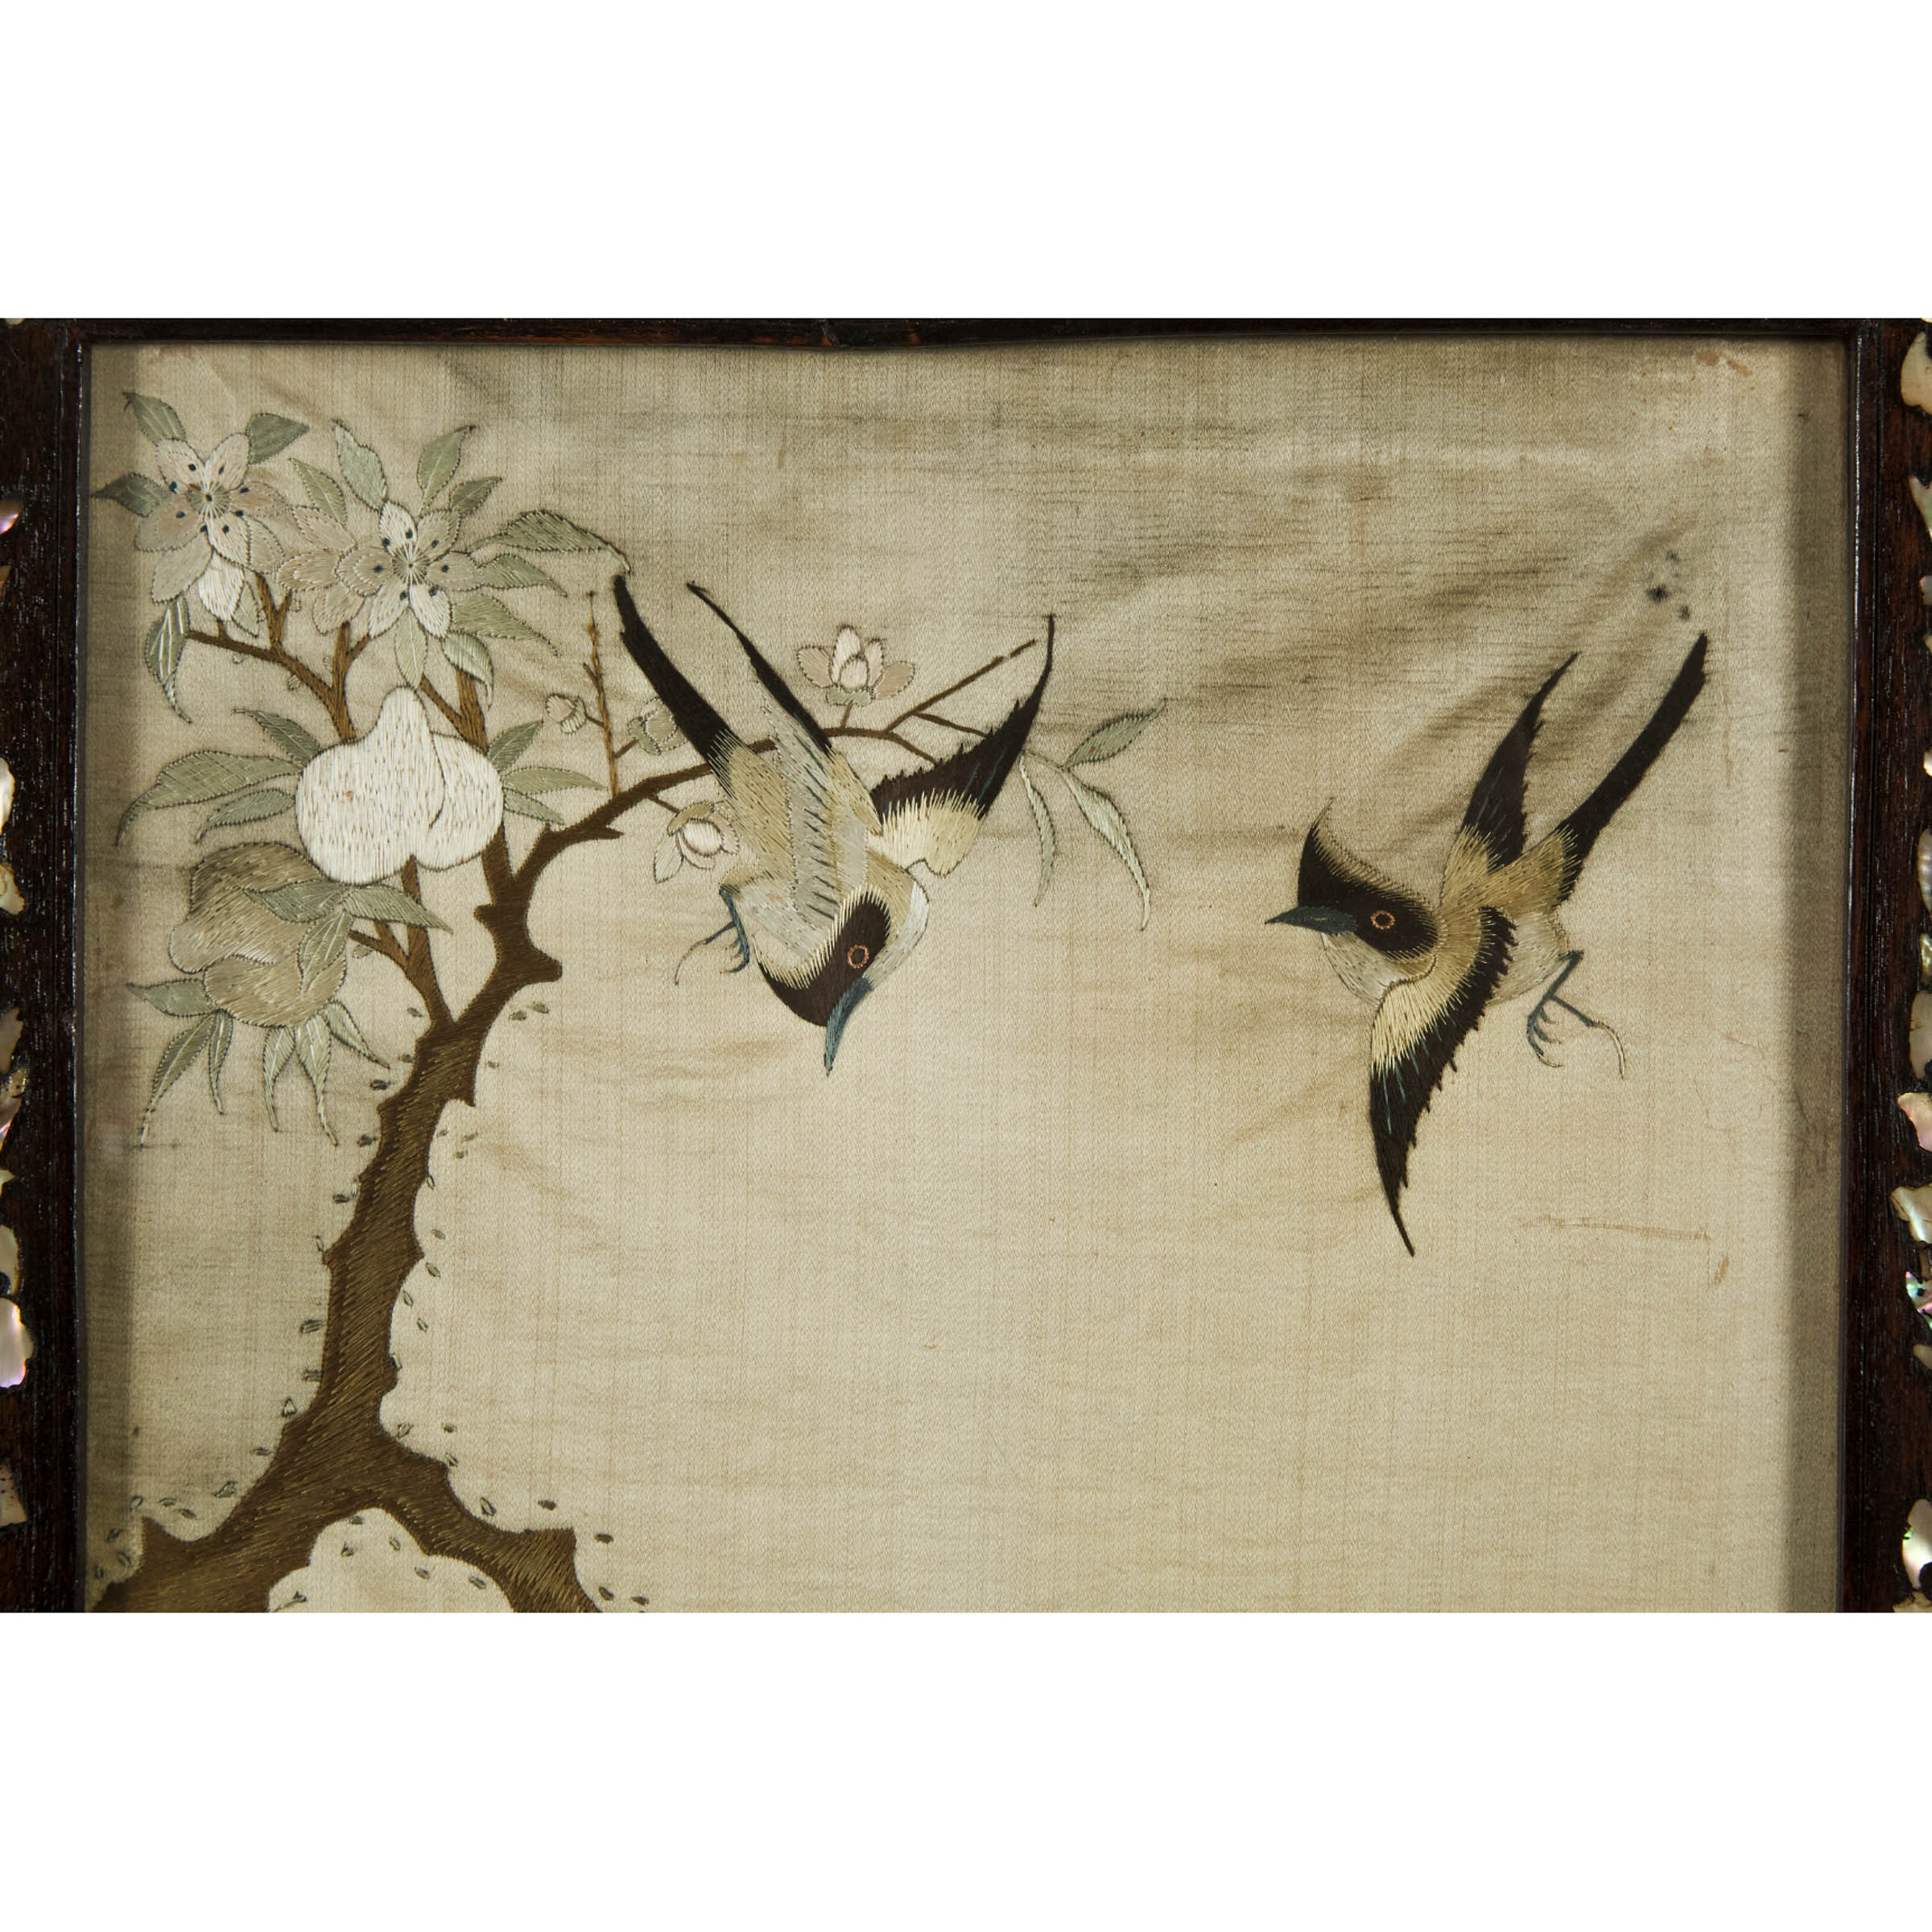 A Pair of Silk Embroidered 'Birds of Paradise' Panels With Mother-of-Pearl Inlaid Frames, Late Qing Dynasty